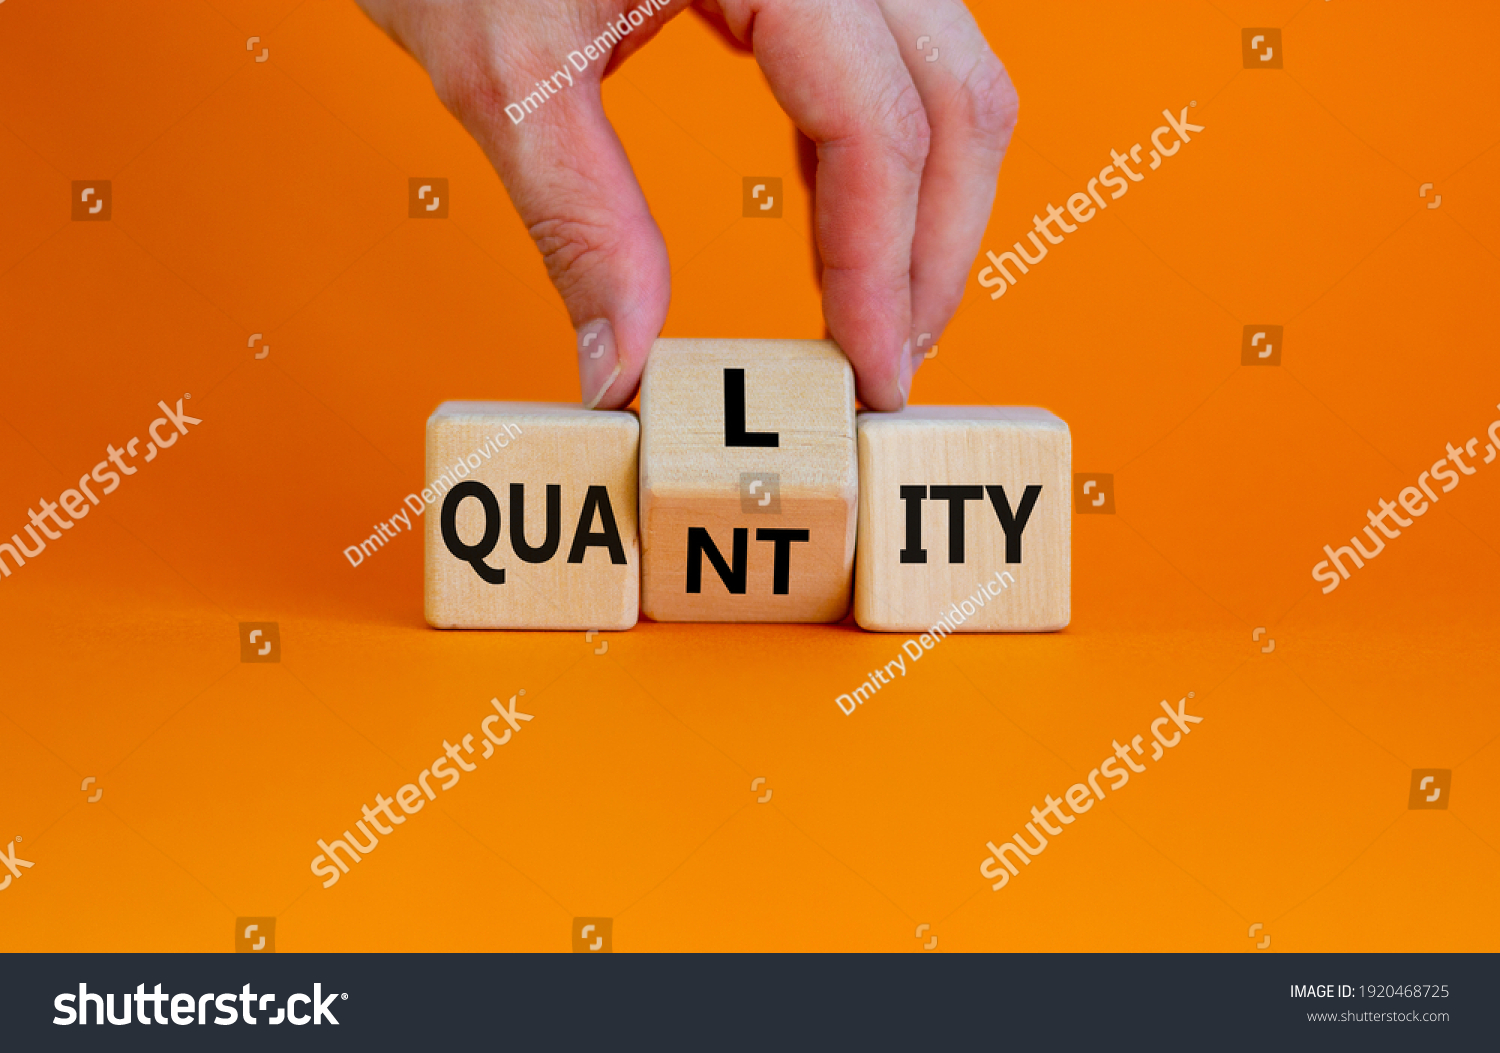 Quality over quantity symbol. Businessman turns cubes and changes the word 'quantity' to 'quality'. Beautiful orange table, orange background, copy space. Business and quality over quantity concept. #1920468725